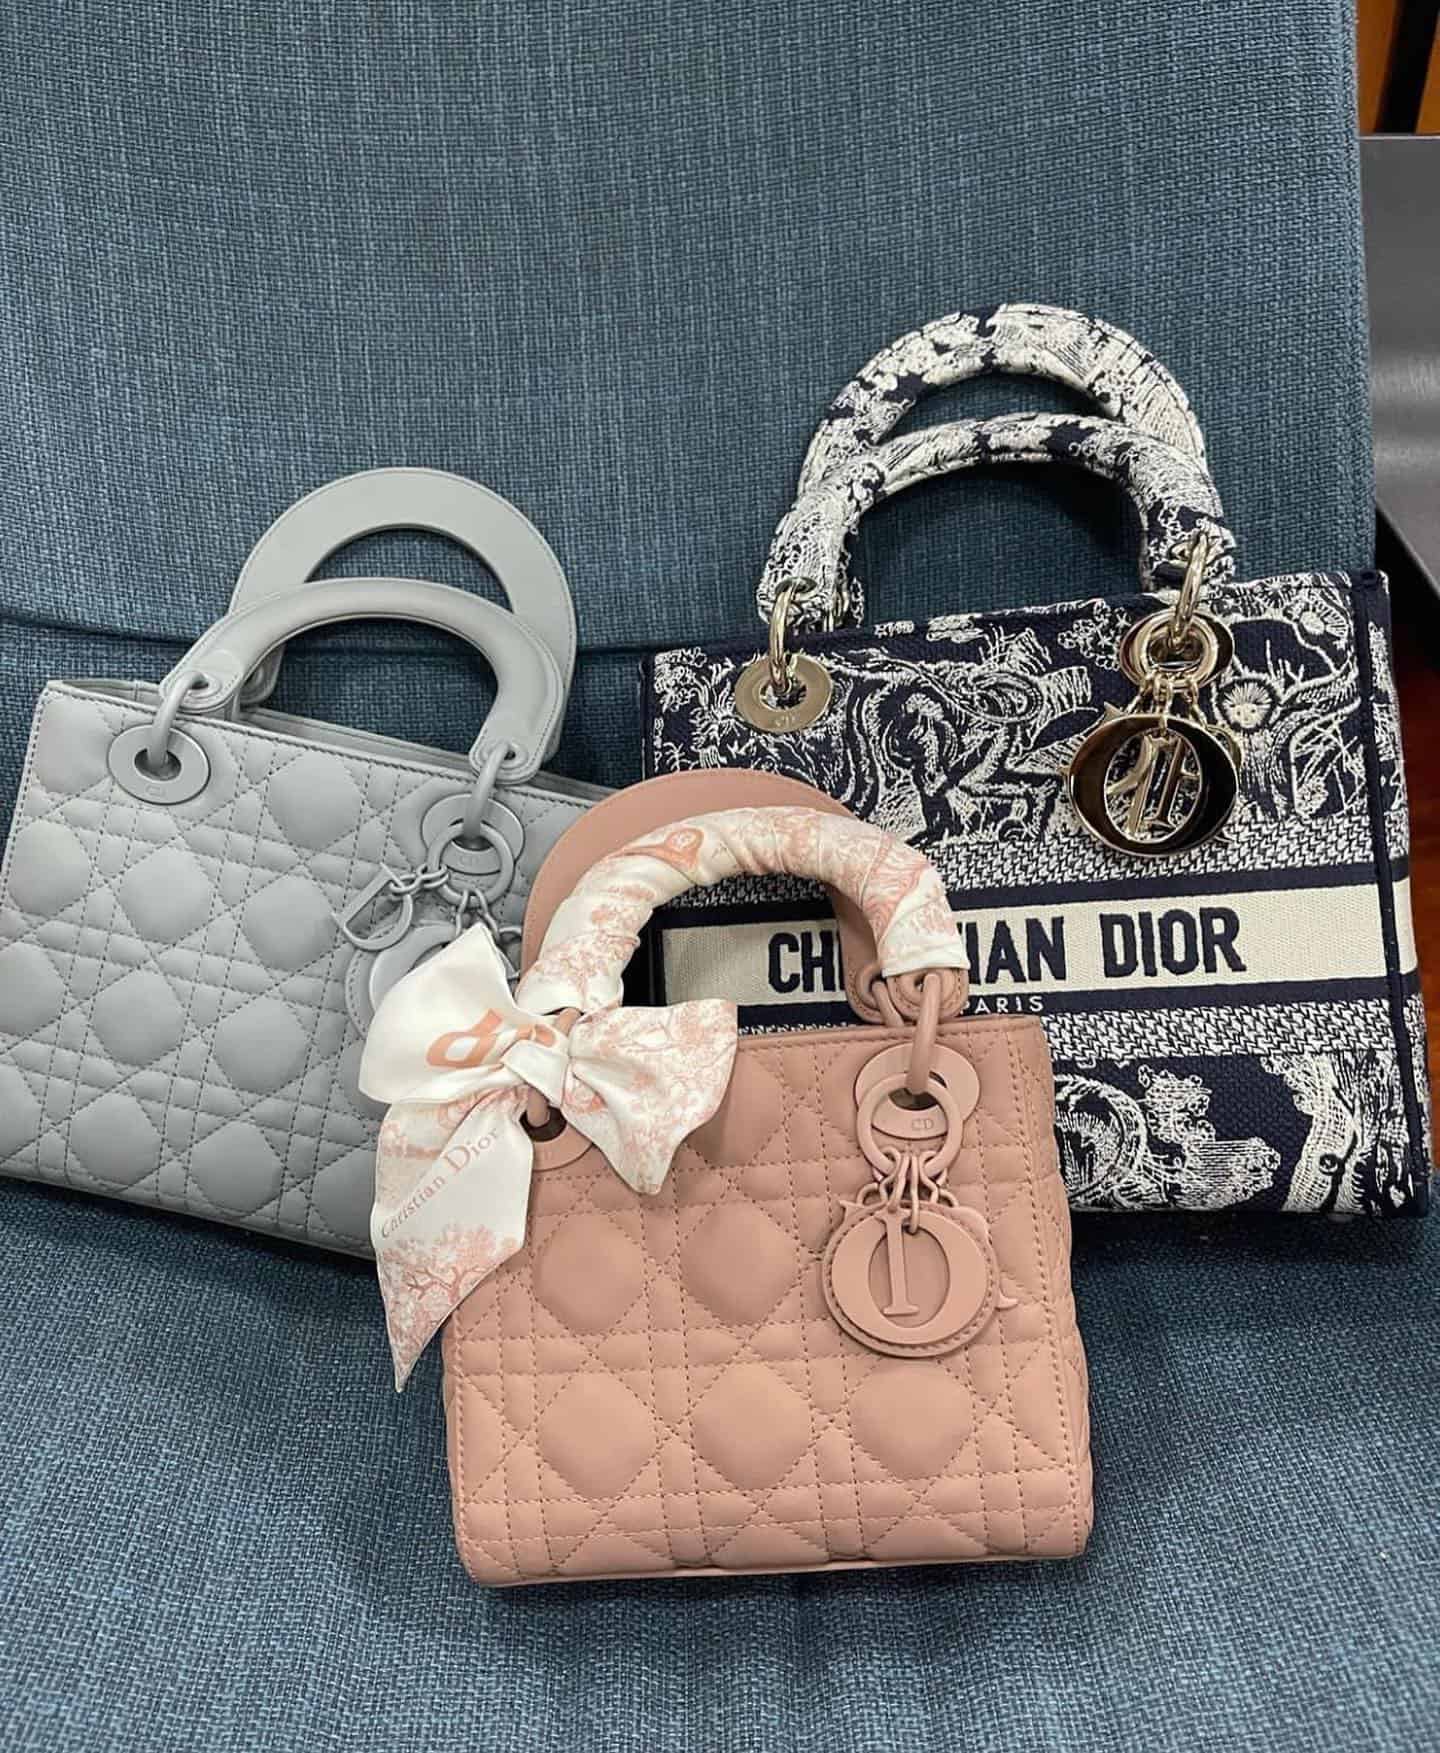 How much did lady dior bags increase in price in 2023